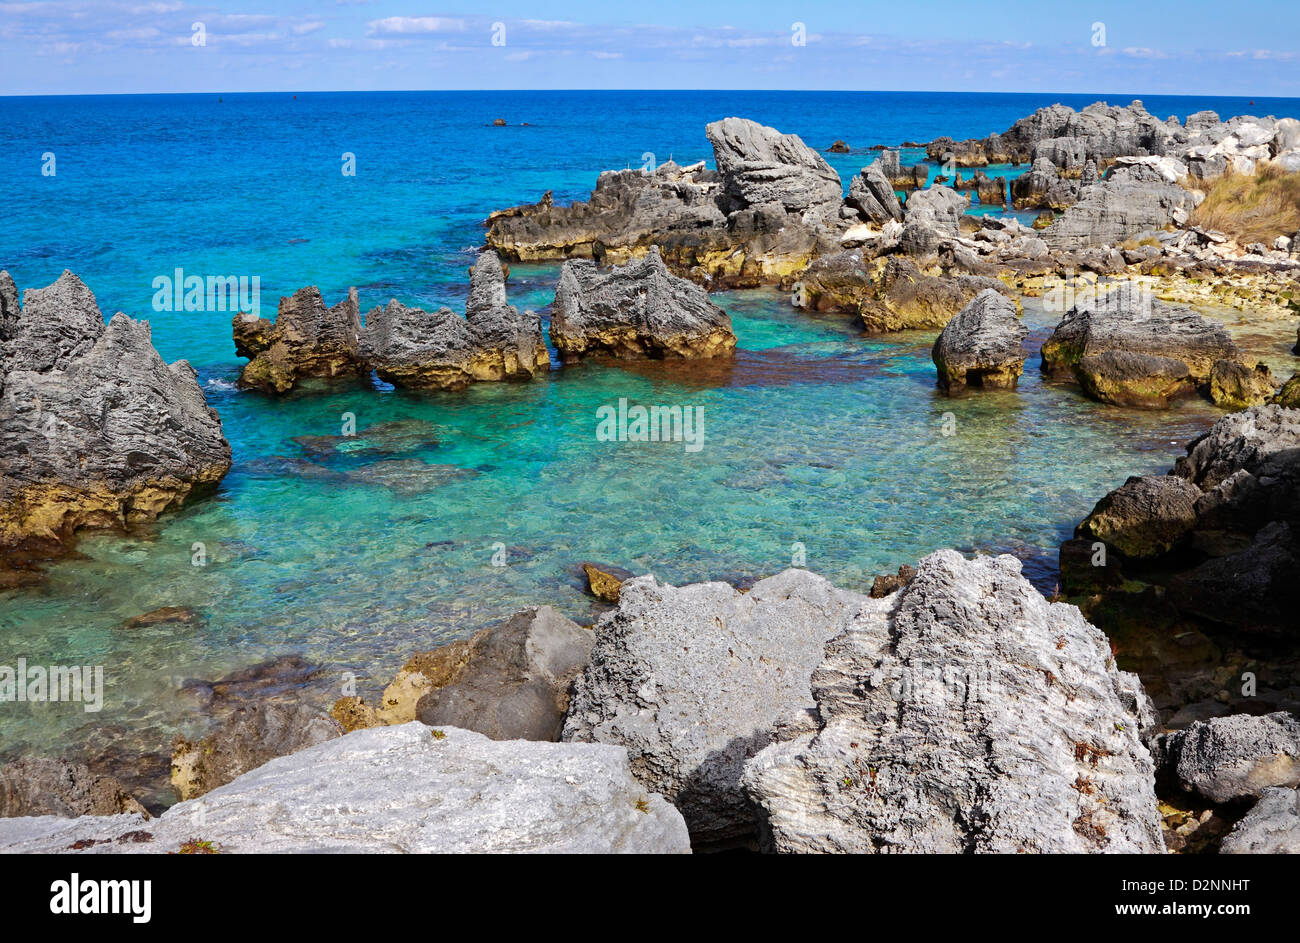 Beautiful beach with coral reef outcrops in Bermuda Stock Photo